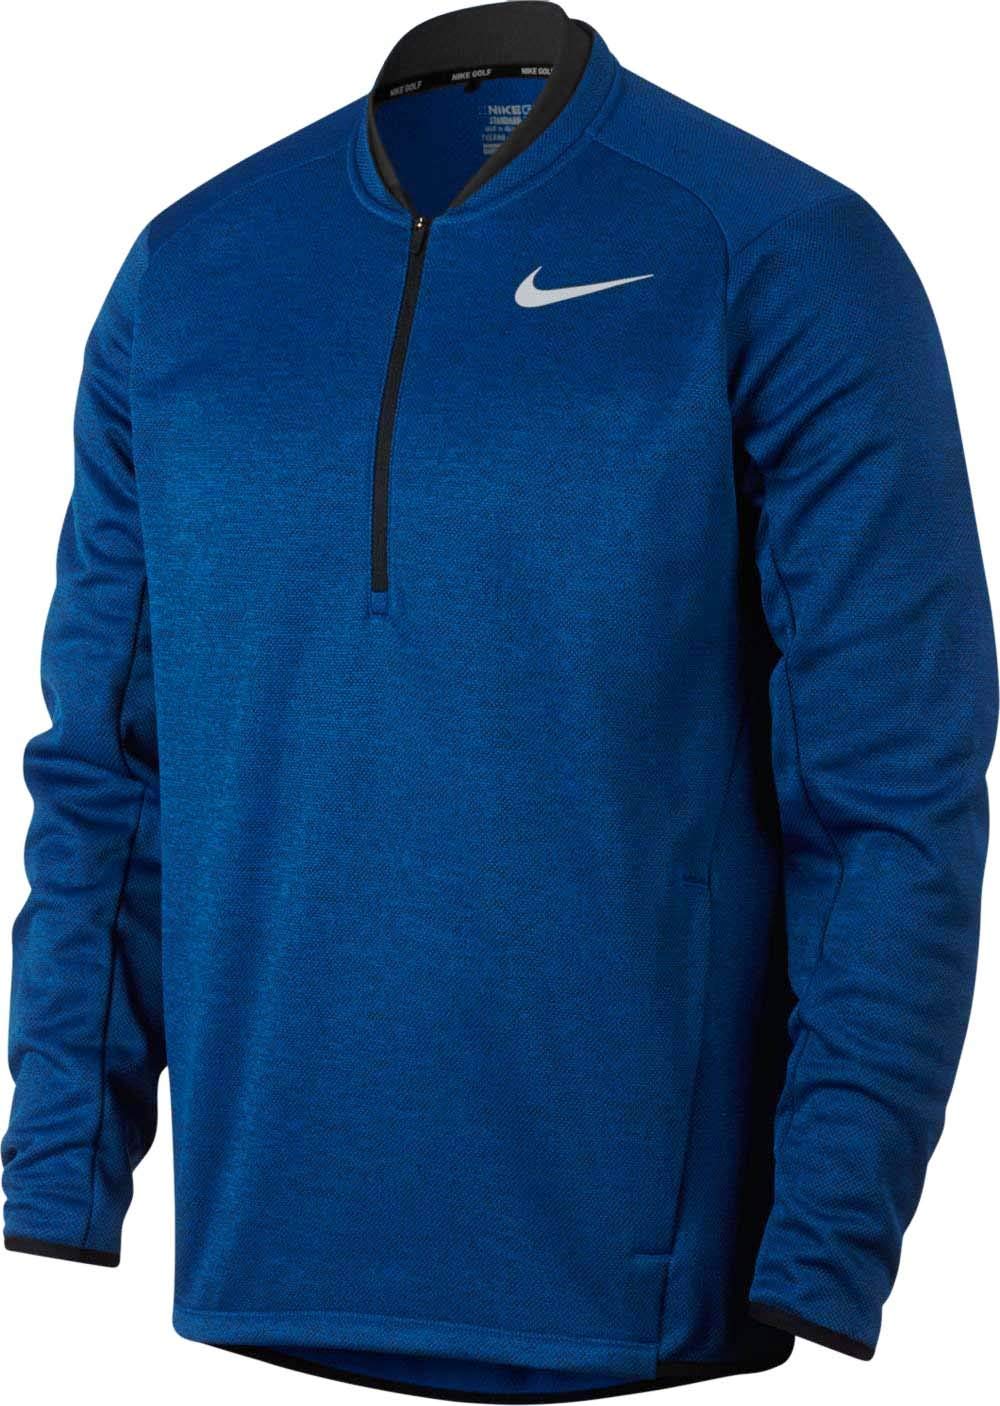 Nike Mens Therma Fit Golf Pullover Tops